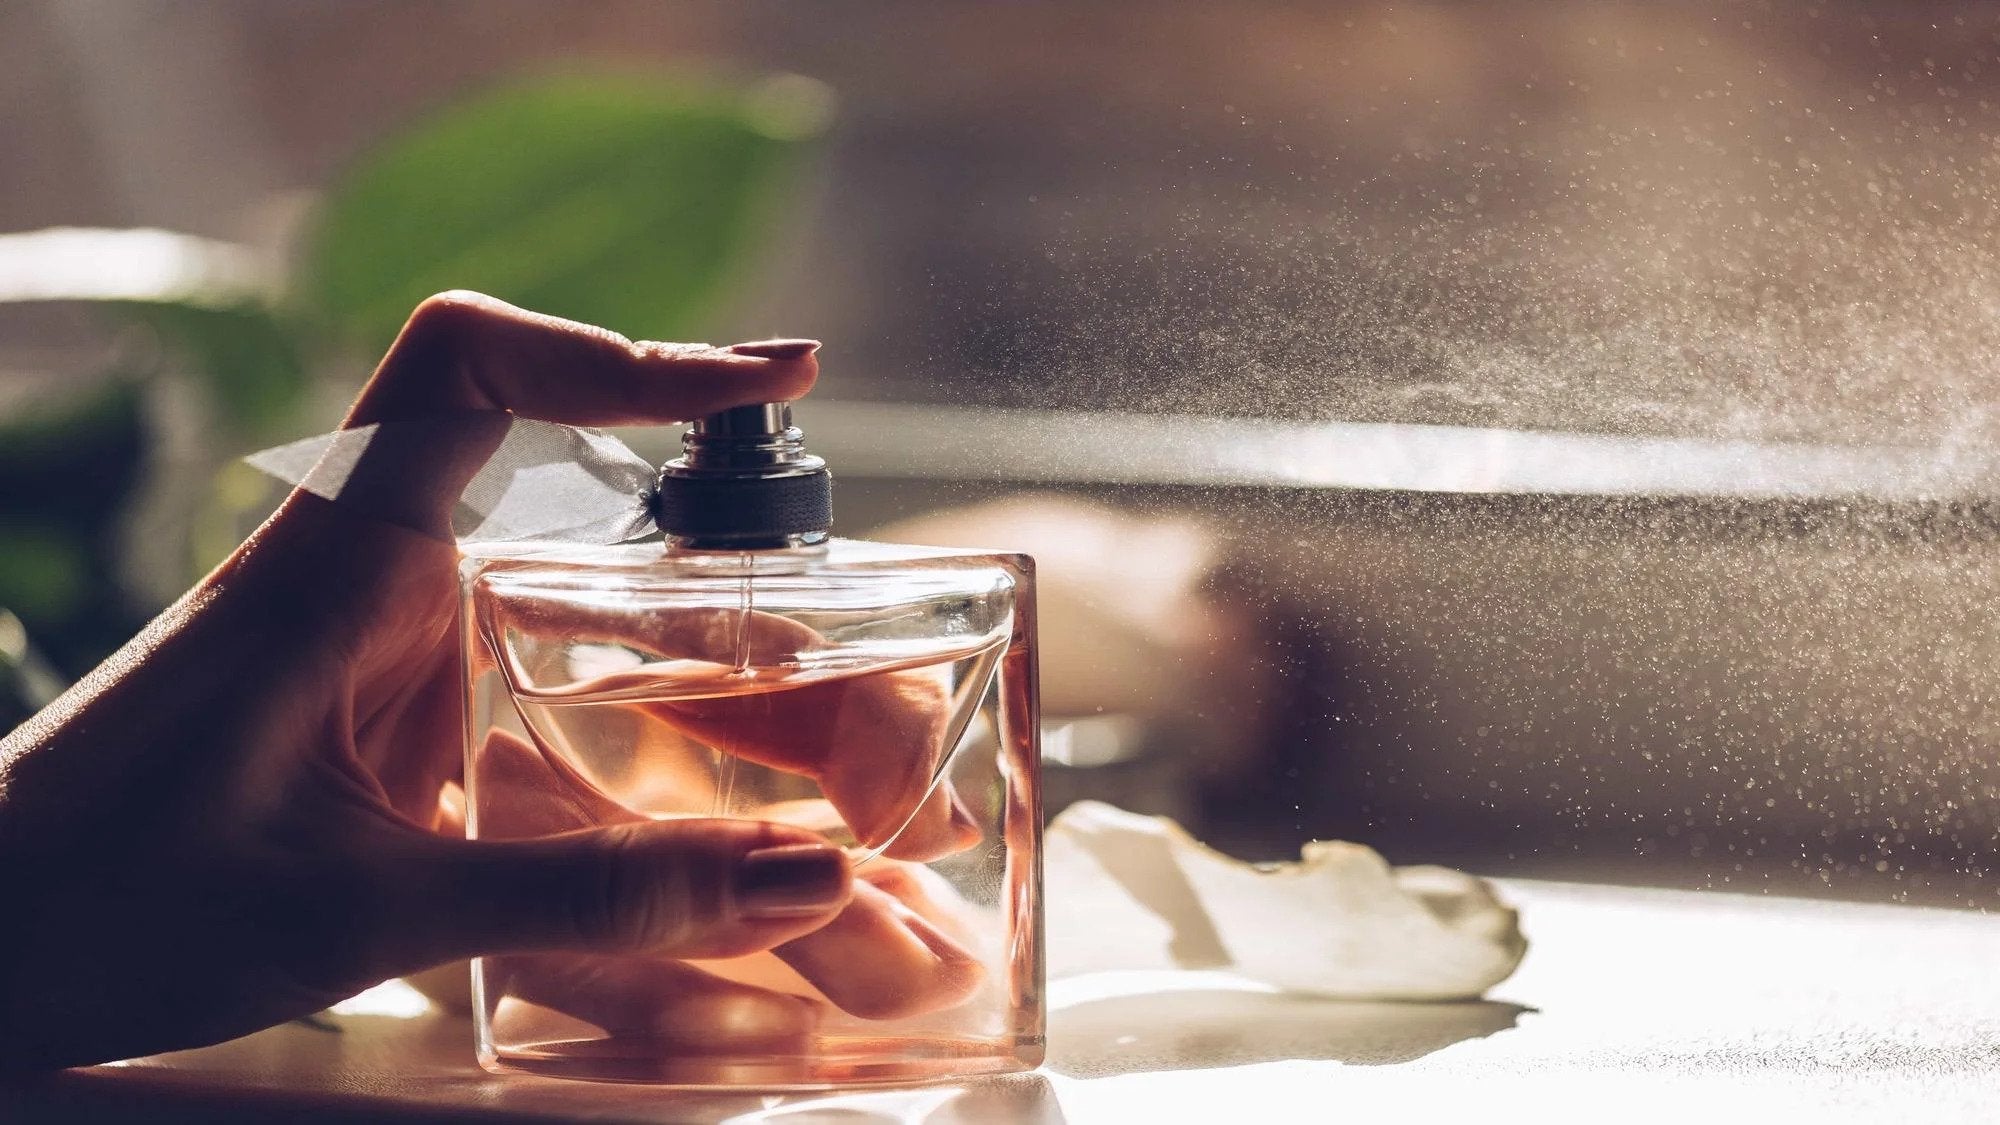 HOW TO SHOP FOR BEST PERFUMES ACCORDING TO SEASONS